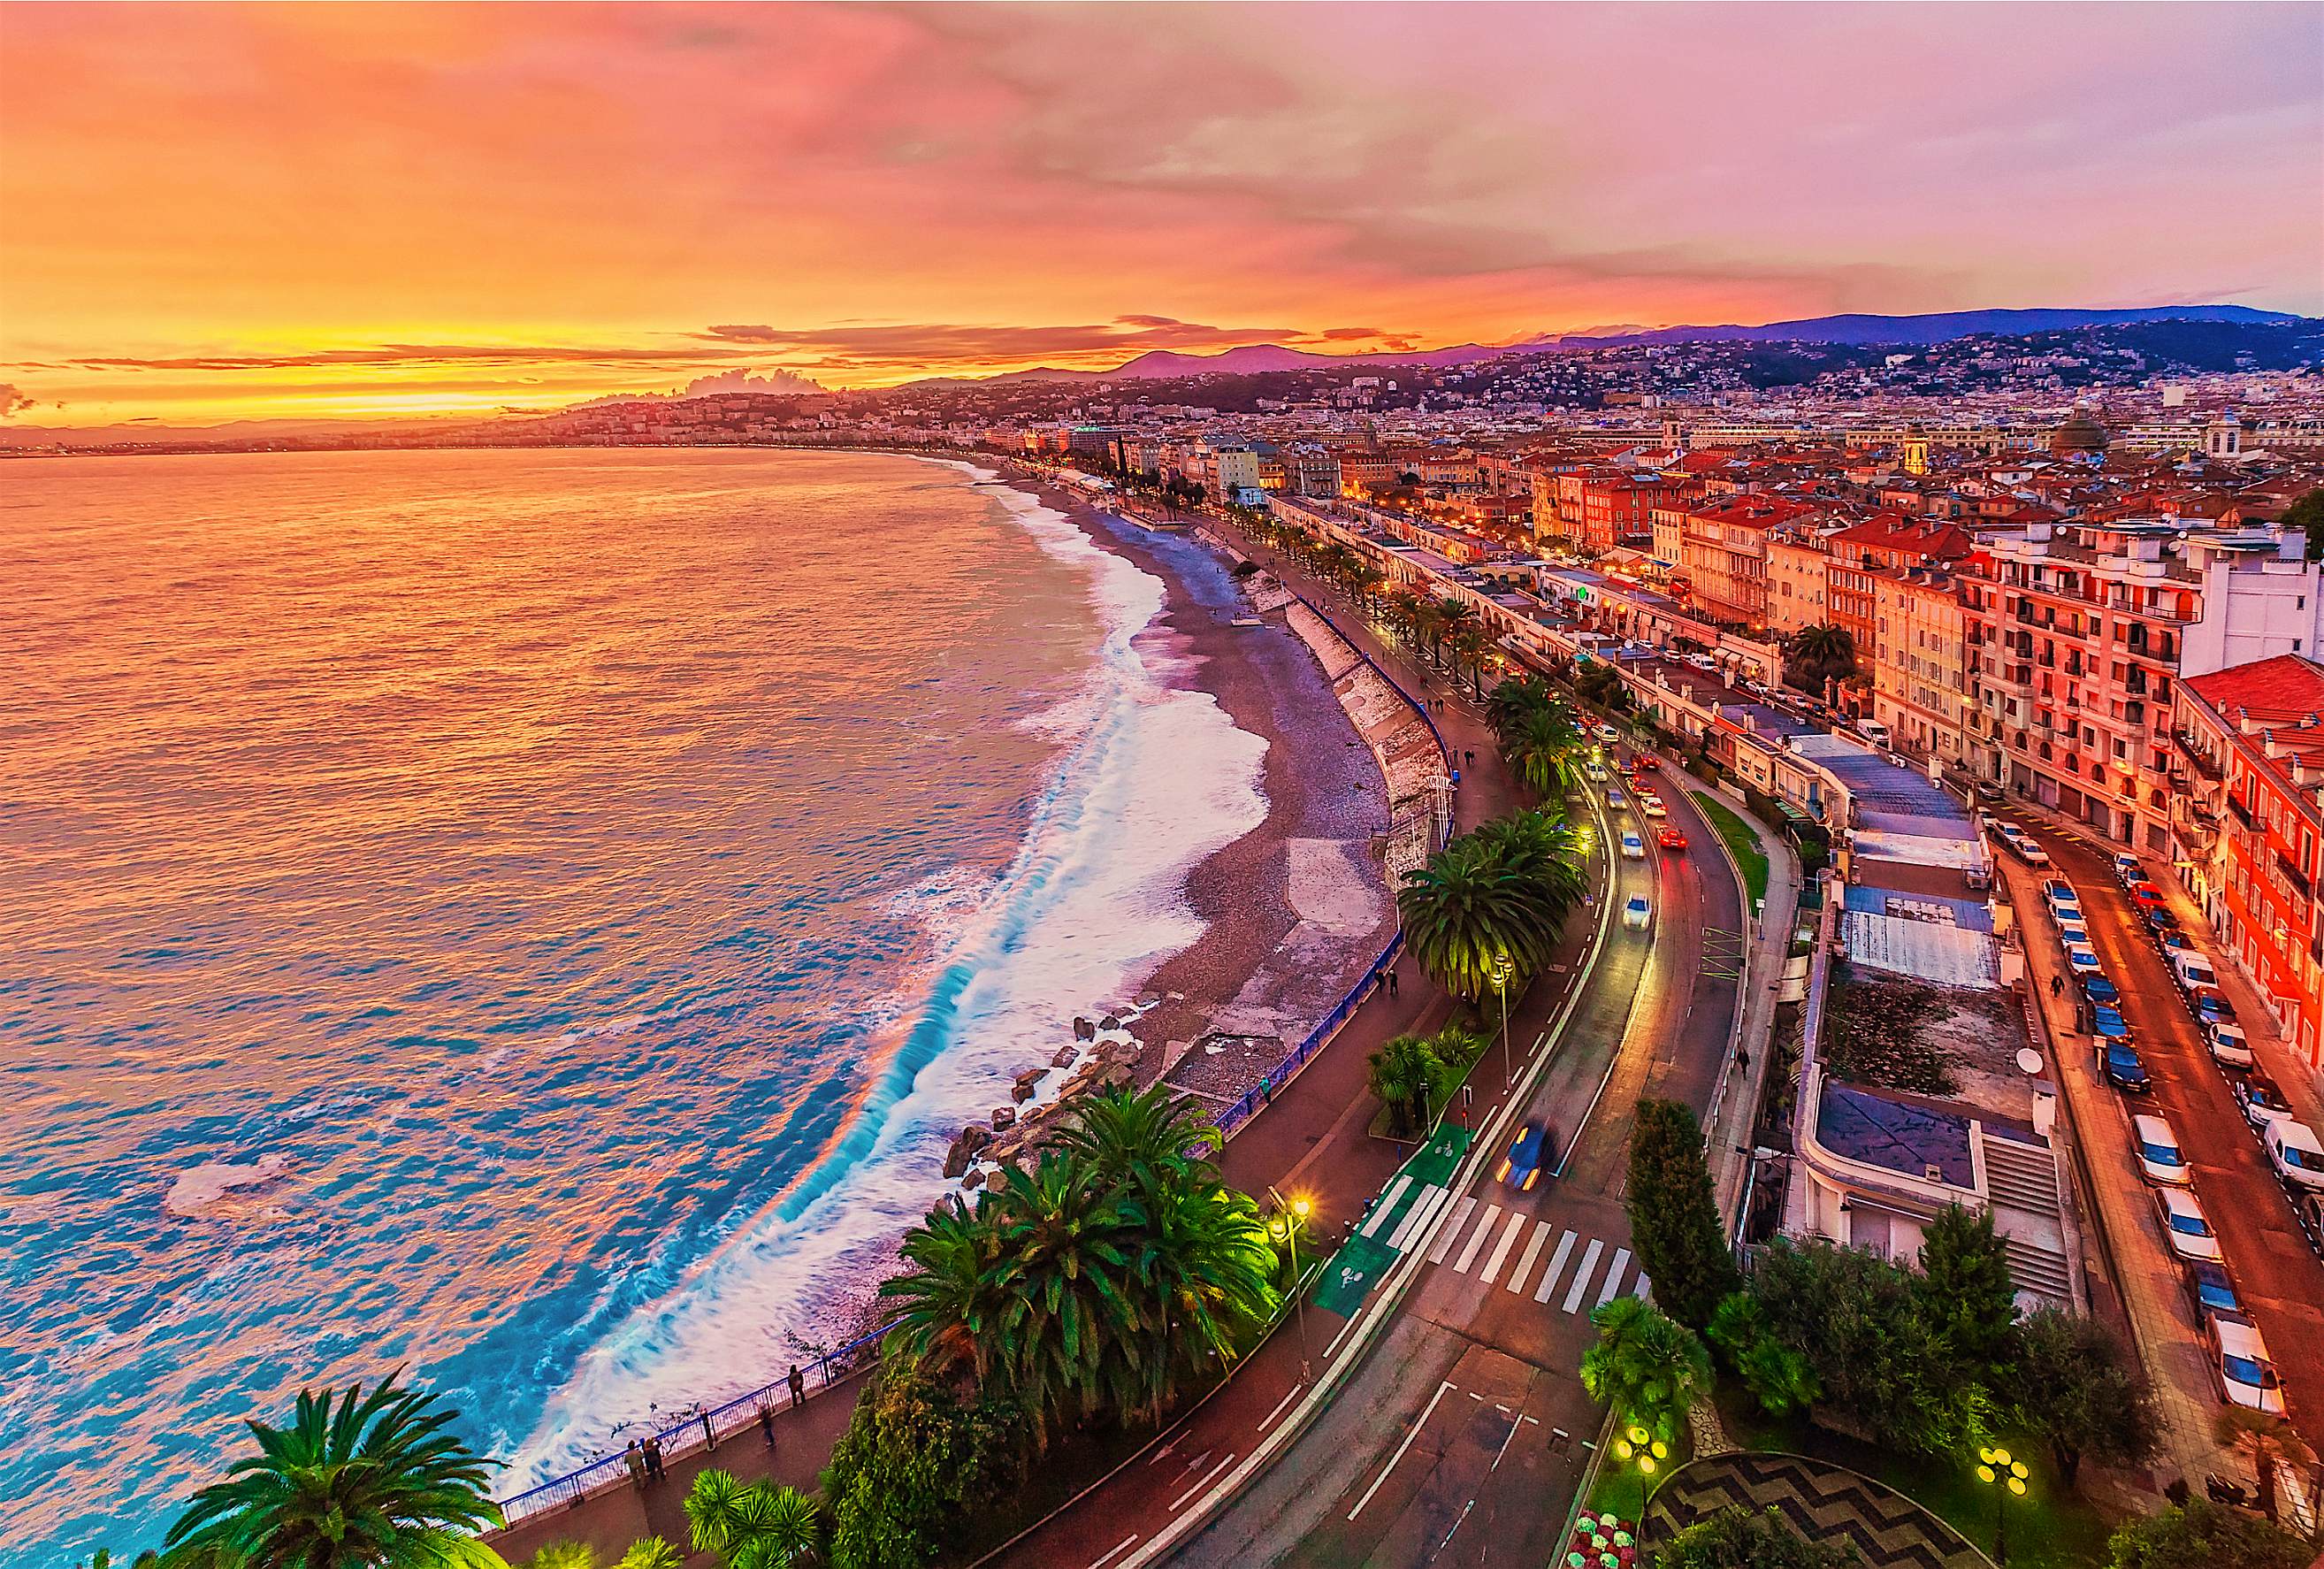 travel to nice france from us